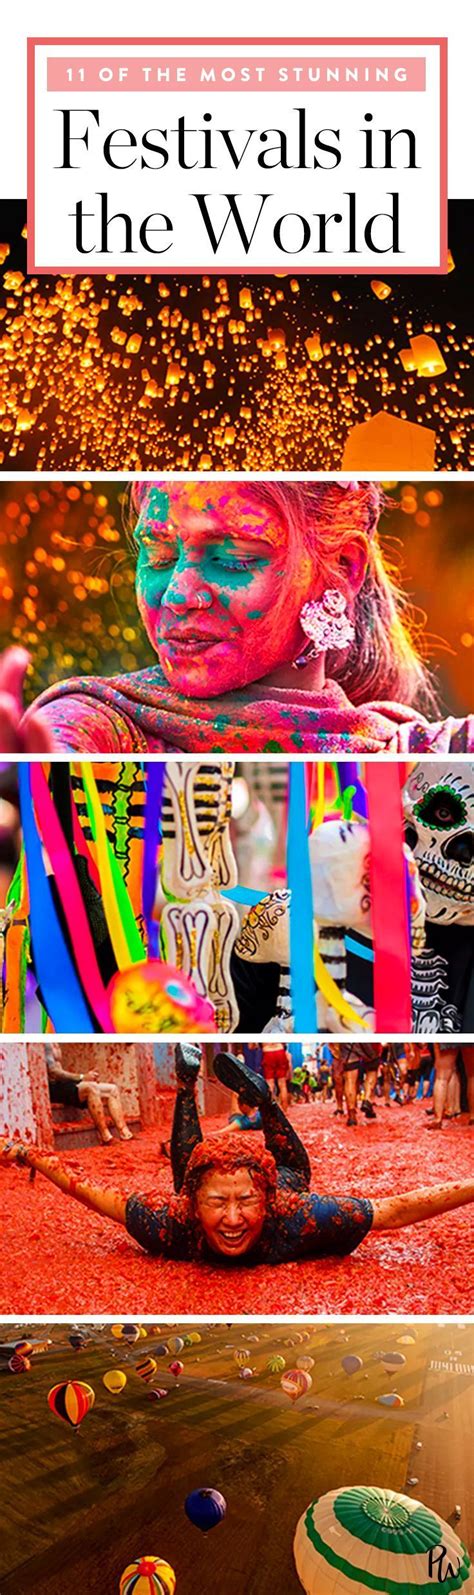 11 of the best most stunning festivals in the world